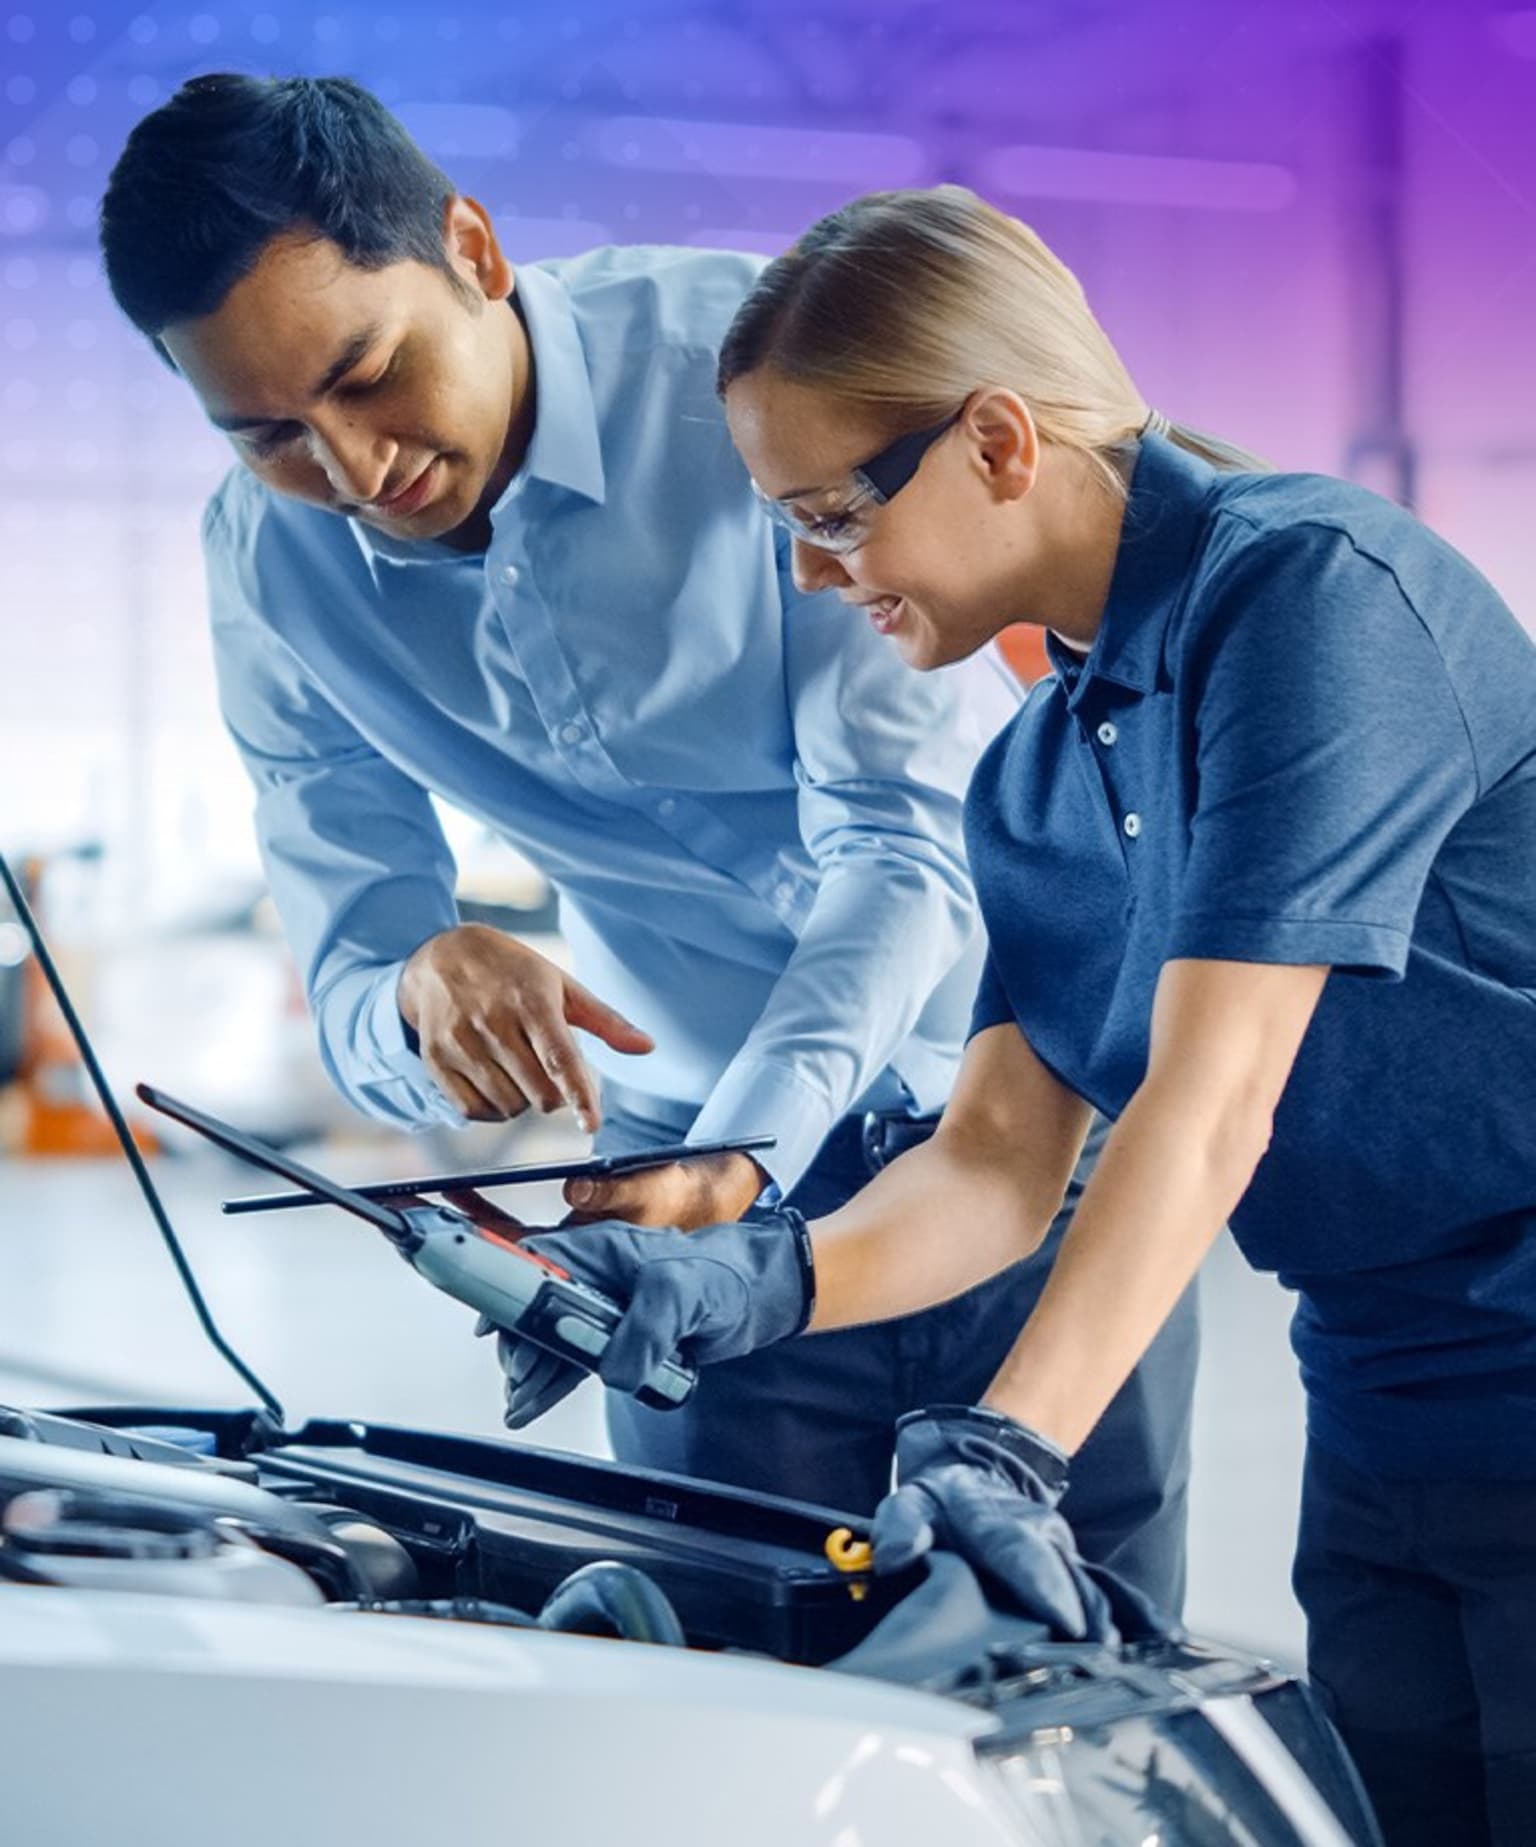 What Does "Certified Auto Service" Mean?